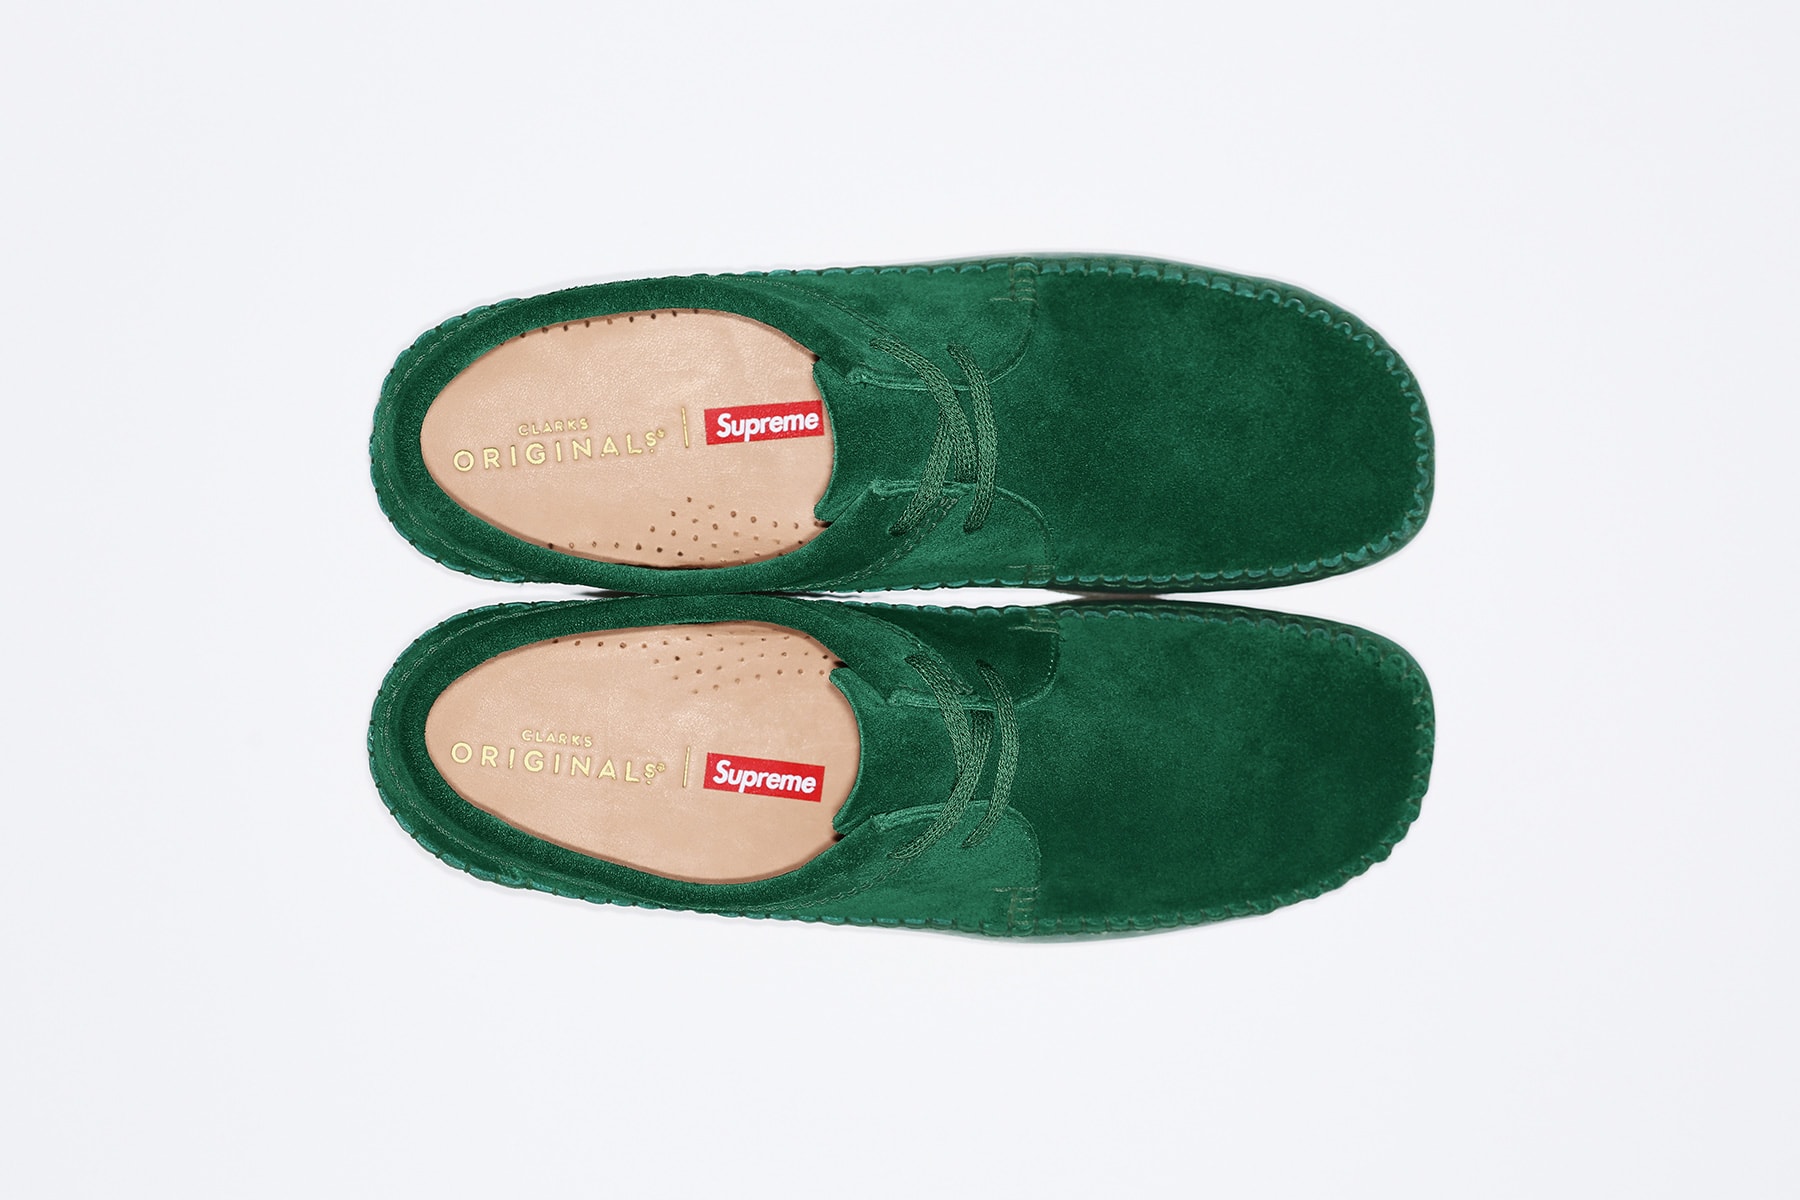 Supreme x Clarks Originals Weaver Collection Footwear Shoes Classic Made in UK Leather New York Supreme Crepe Suede